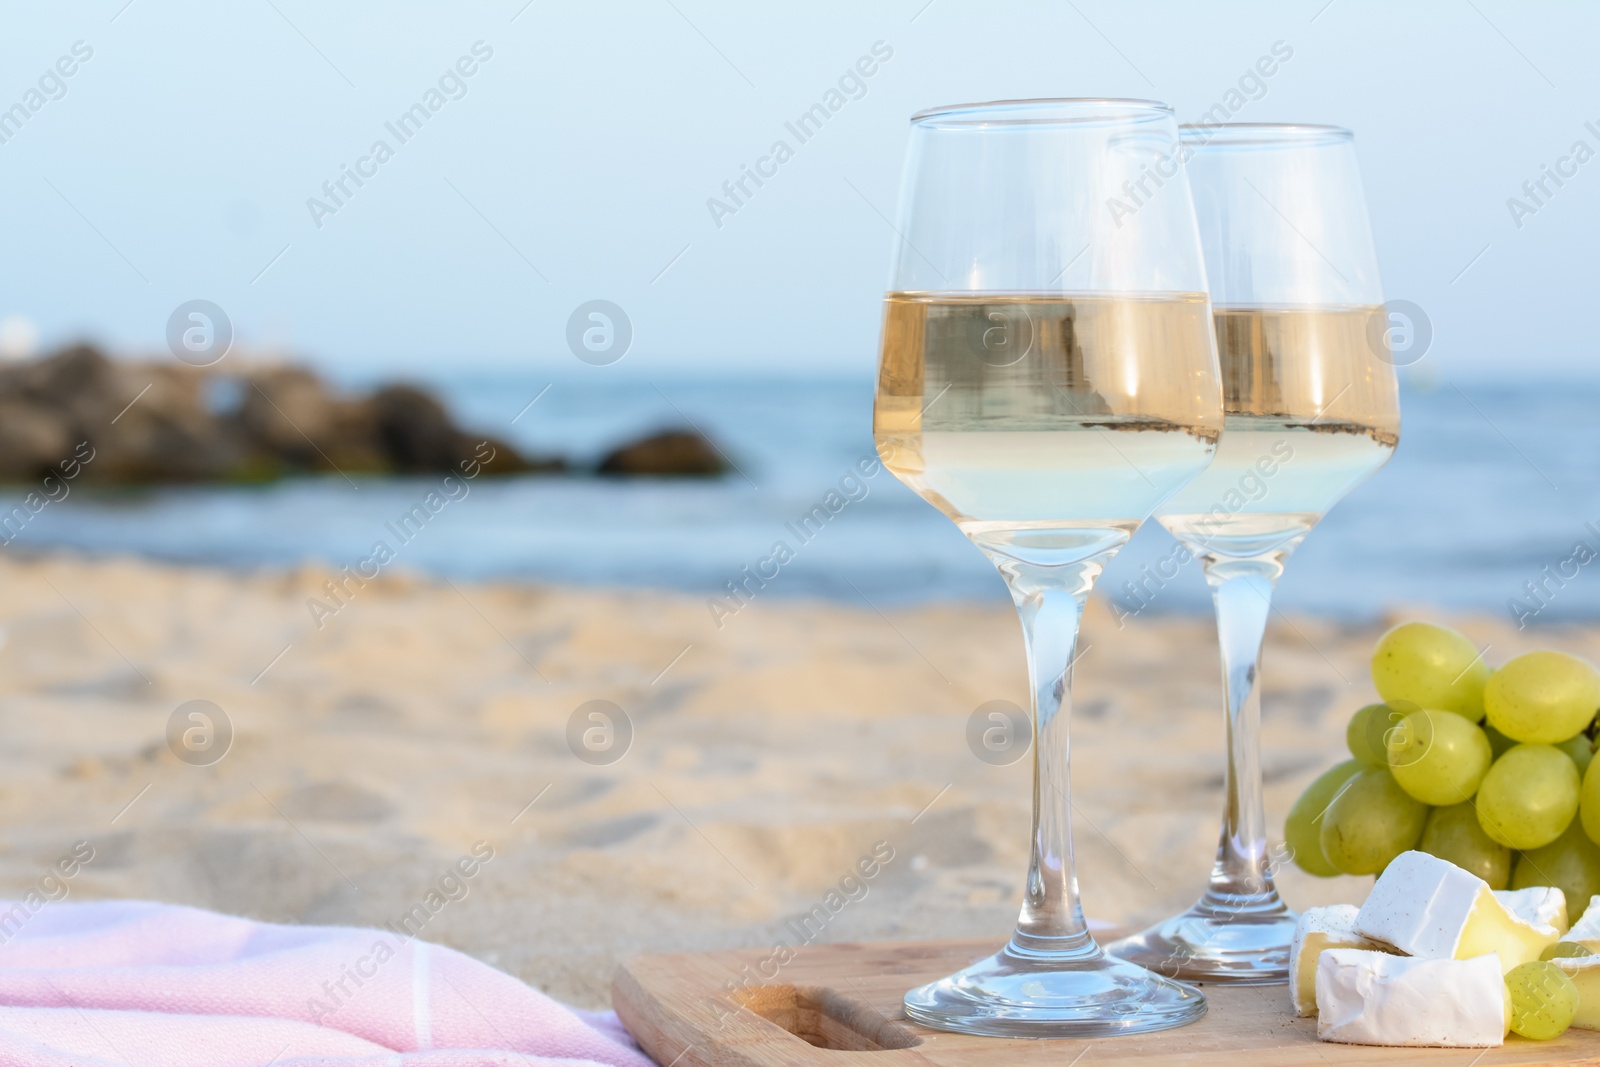 Photo of Glasses with white wine and snacks on sandy seashore. Space for text